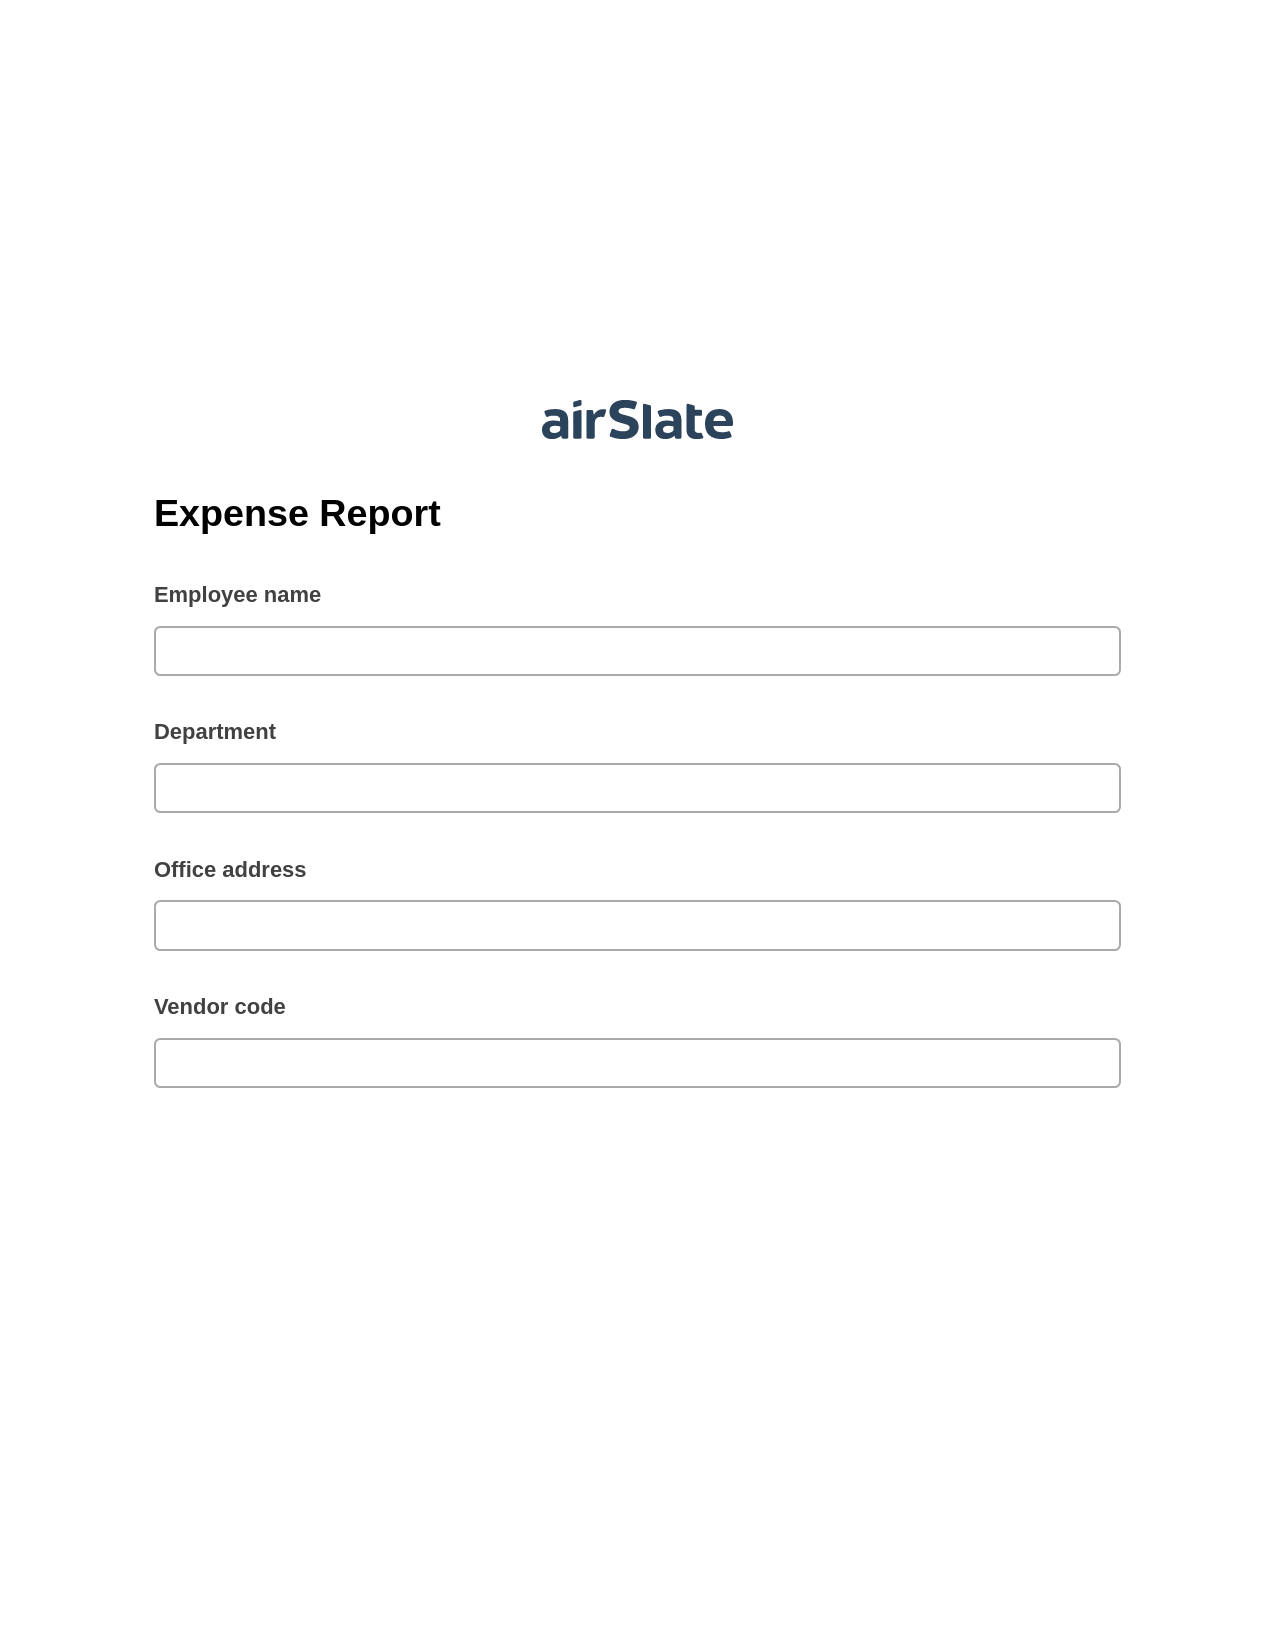 Multirole Expense Report Pre-fill from Excel Spreadsheet Bot, Update Salesforce Record Bot, Archive to SharePoint Folder Bot